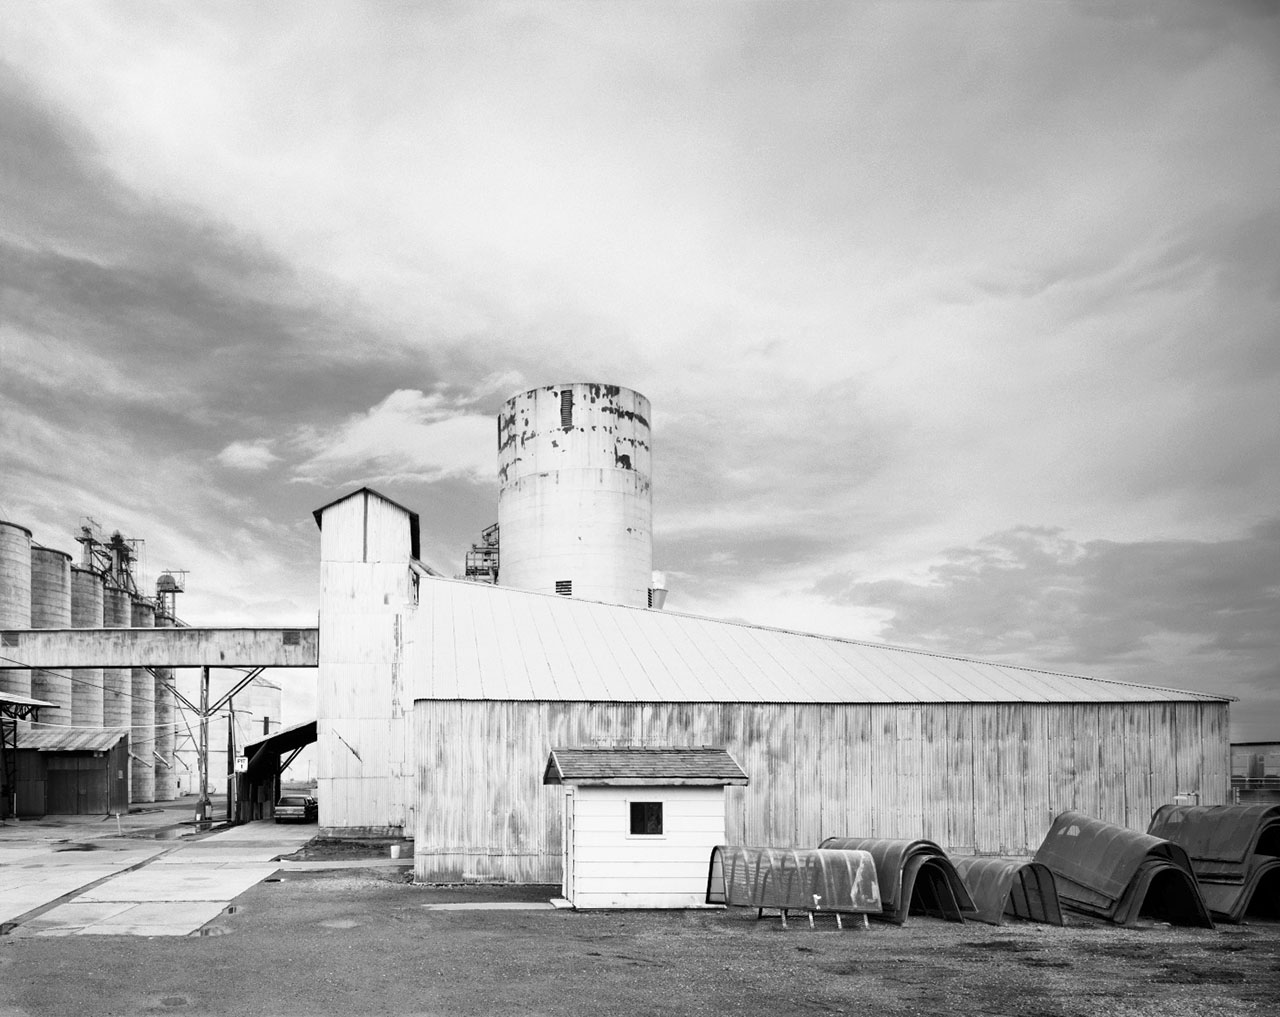 Grain Elevator Complex from David Stark Wilson's photography book Structures of Utility